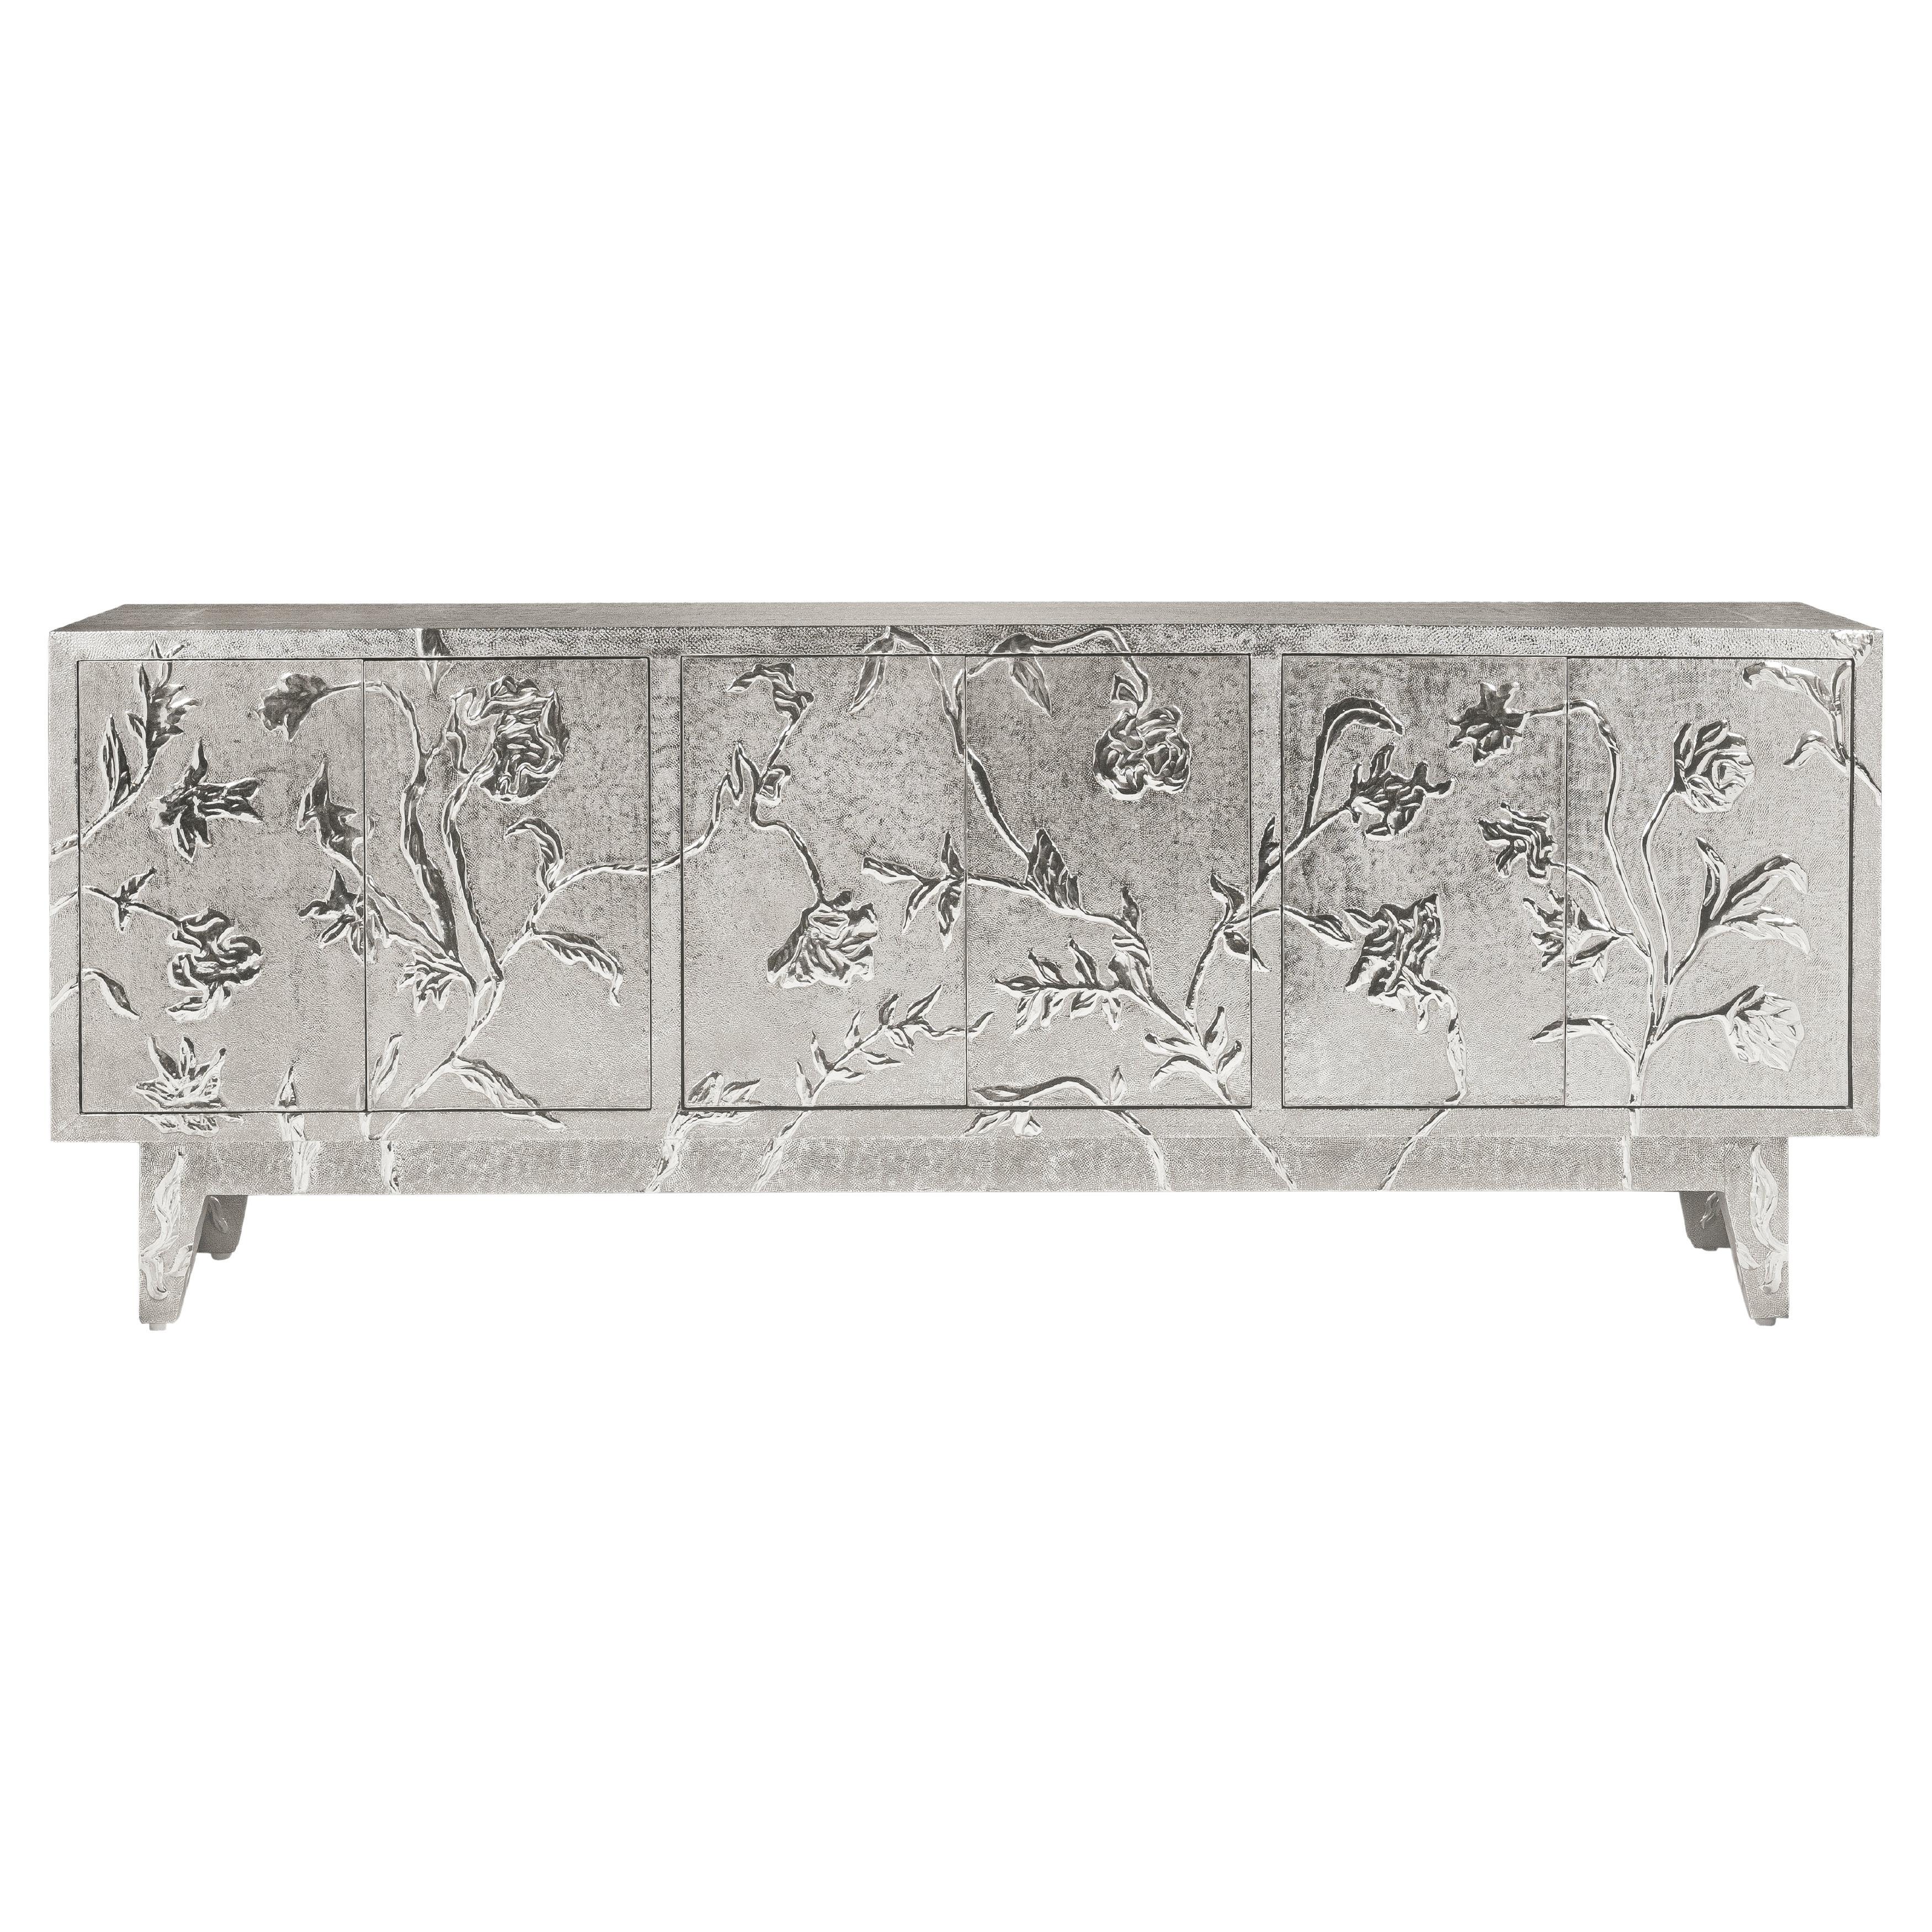 Introducing the Floral Art Deco Buffet - Inspired by the Floral Motifs of Rajasthan Palaces
Stephanie Odegard presents the Floral Art Deco Buffet, a masterpiece Art Deco buffet that seamlessly blends artistry and functionality. This exquisite Art